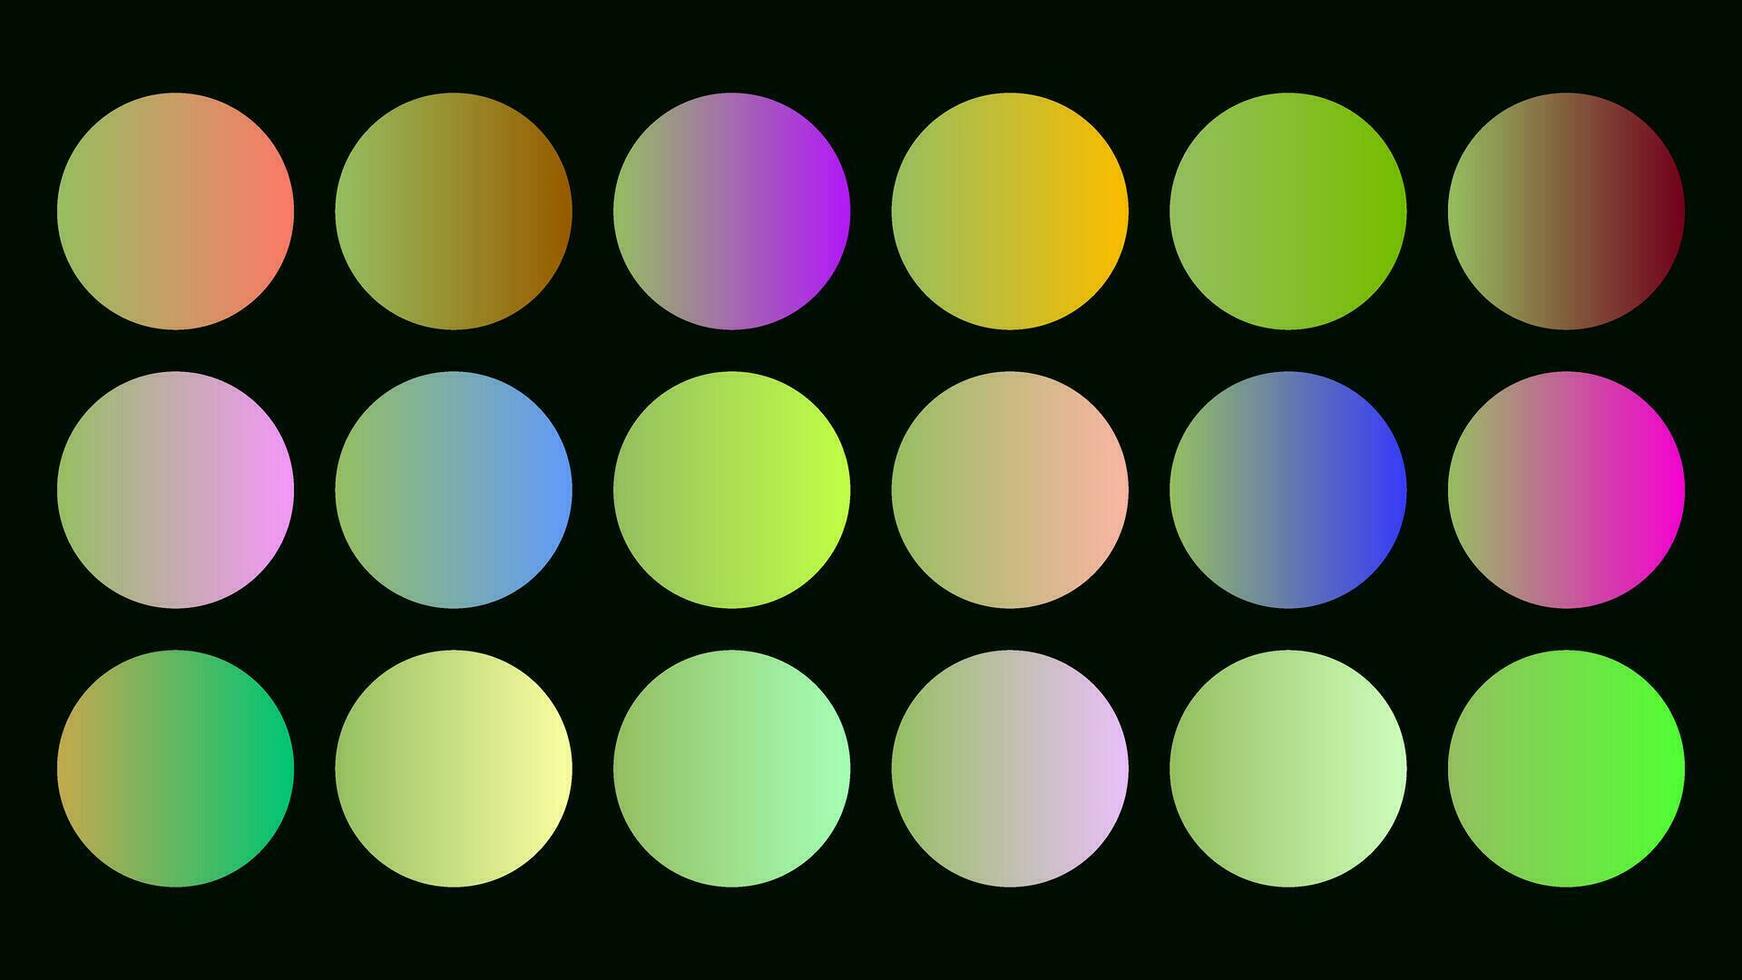 Colorful Olive Color Shade Linear Gradient Palette Swatches Web Kit Circles Template Set vector